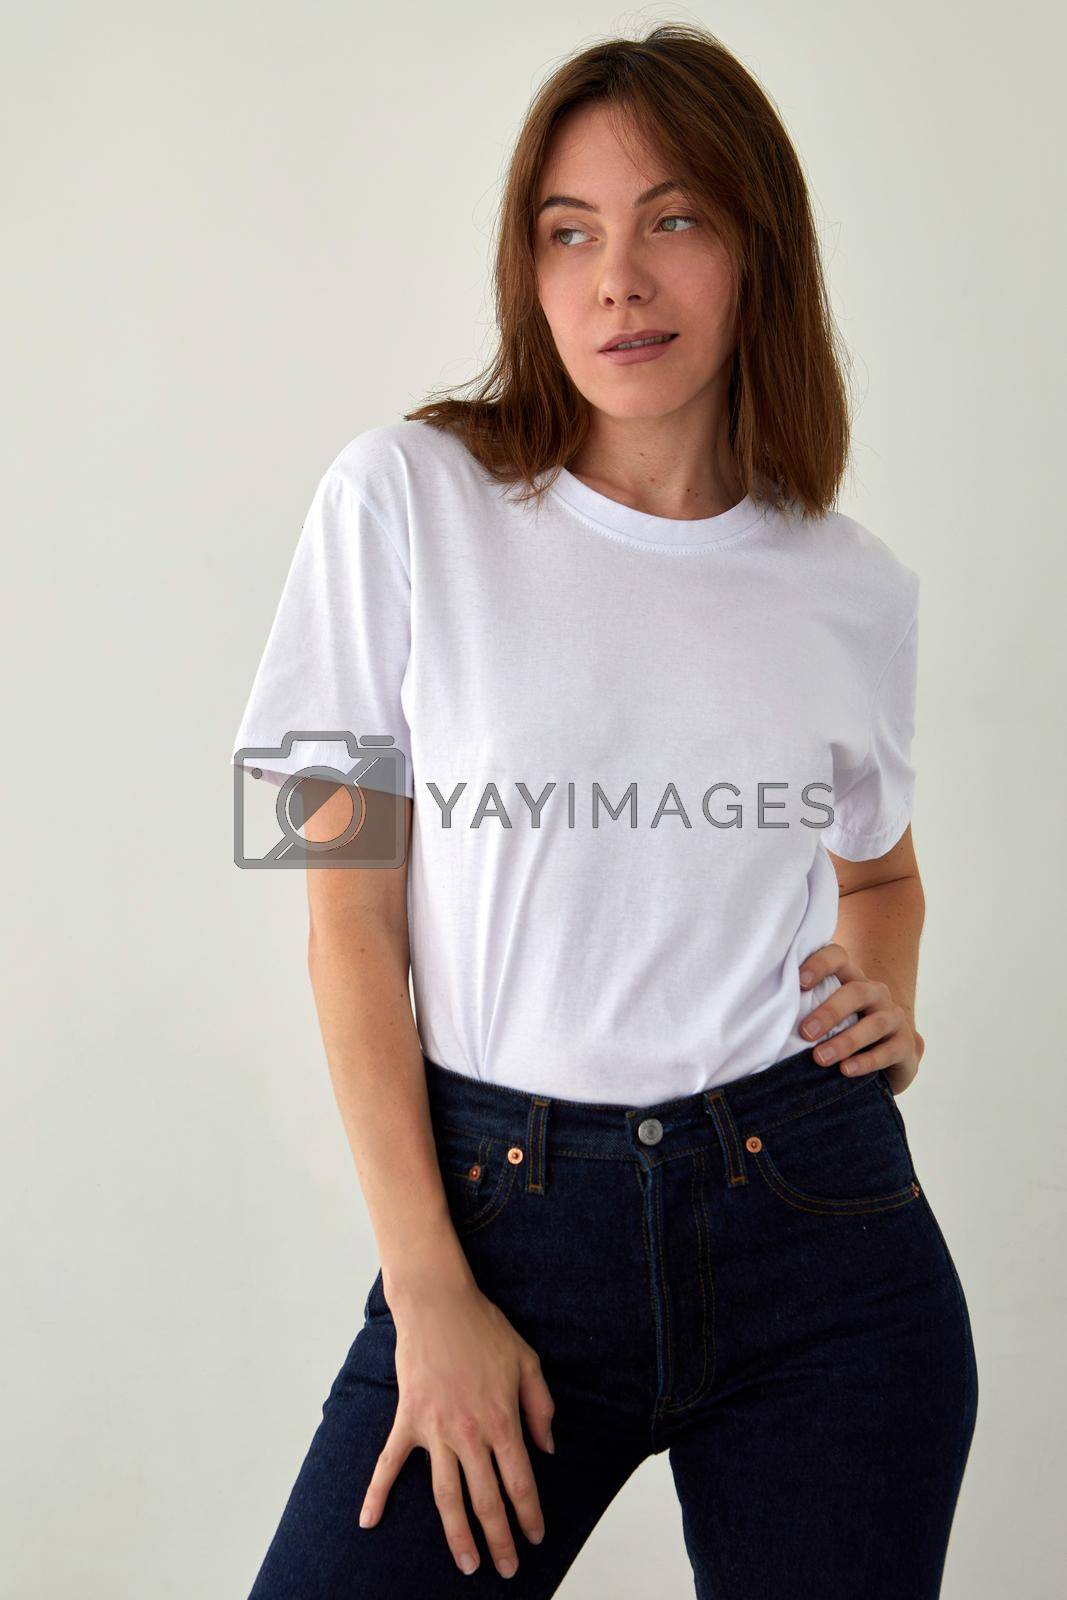 Royalty free image of Cute woman in casual outfit standing in studio by Demkat